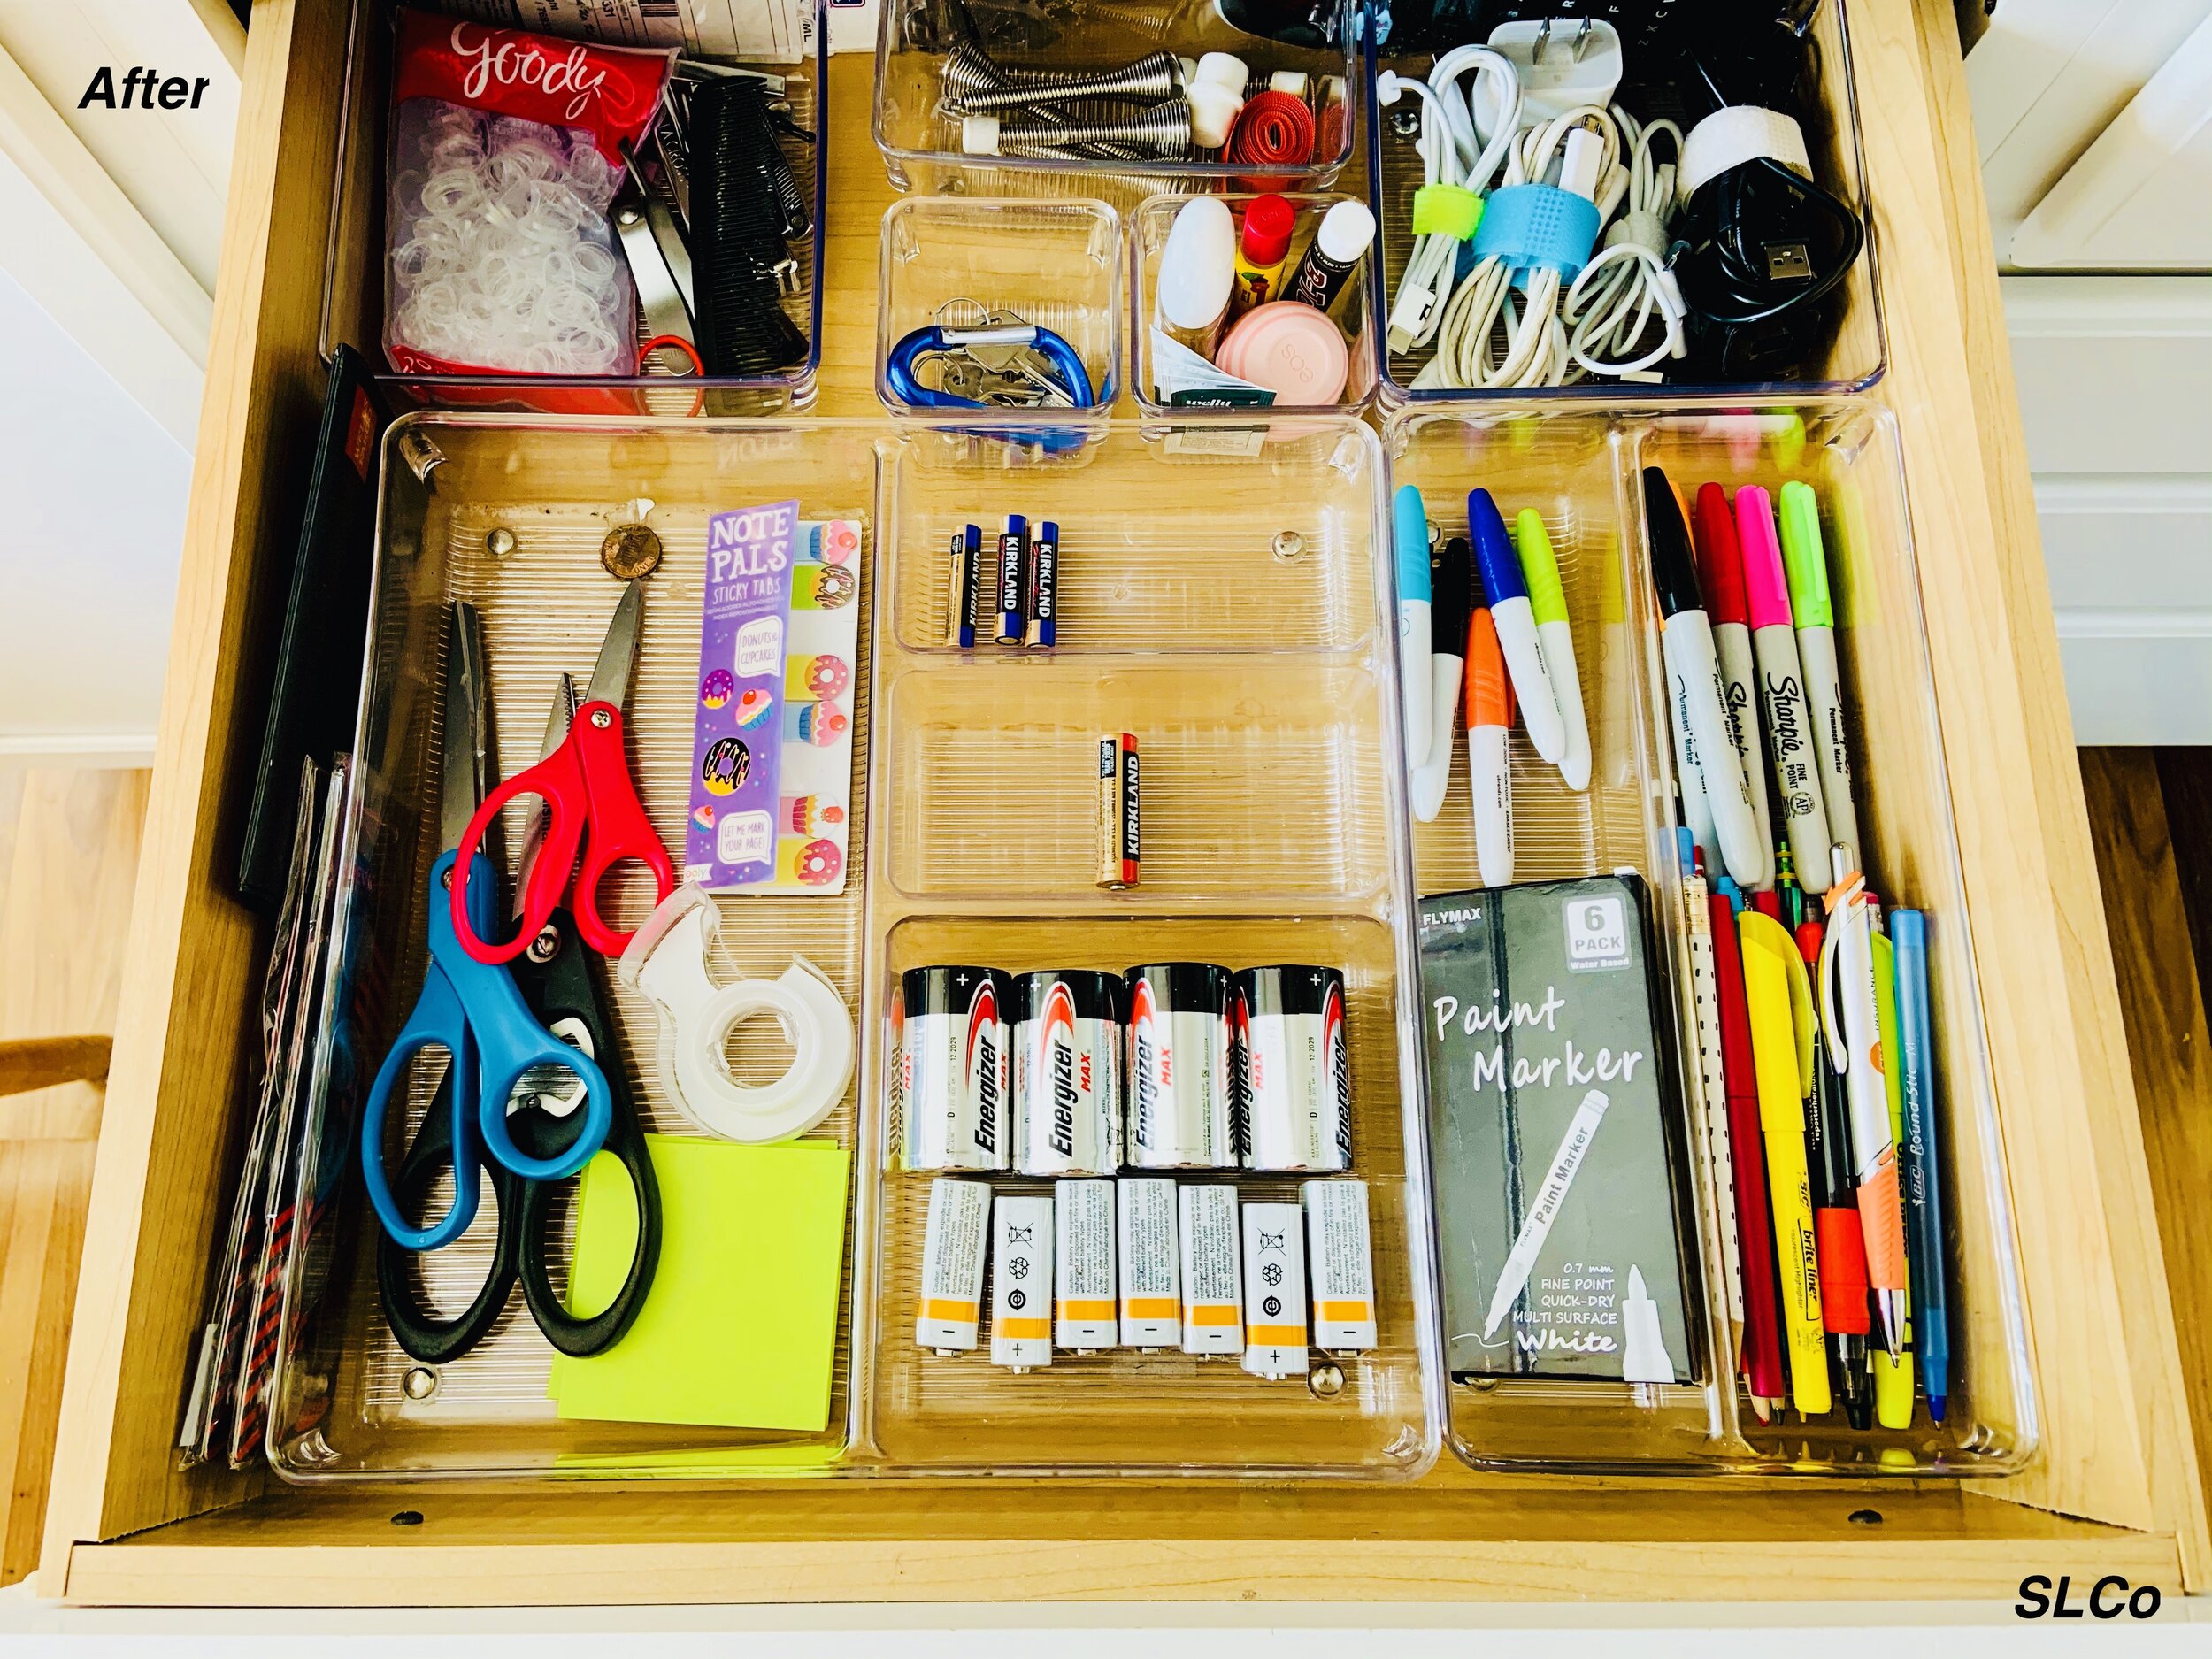 After photo of a drawer with clear organizer containers with batteries in one, pens in another, scizzors and tape, and everything having a home.